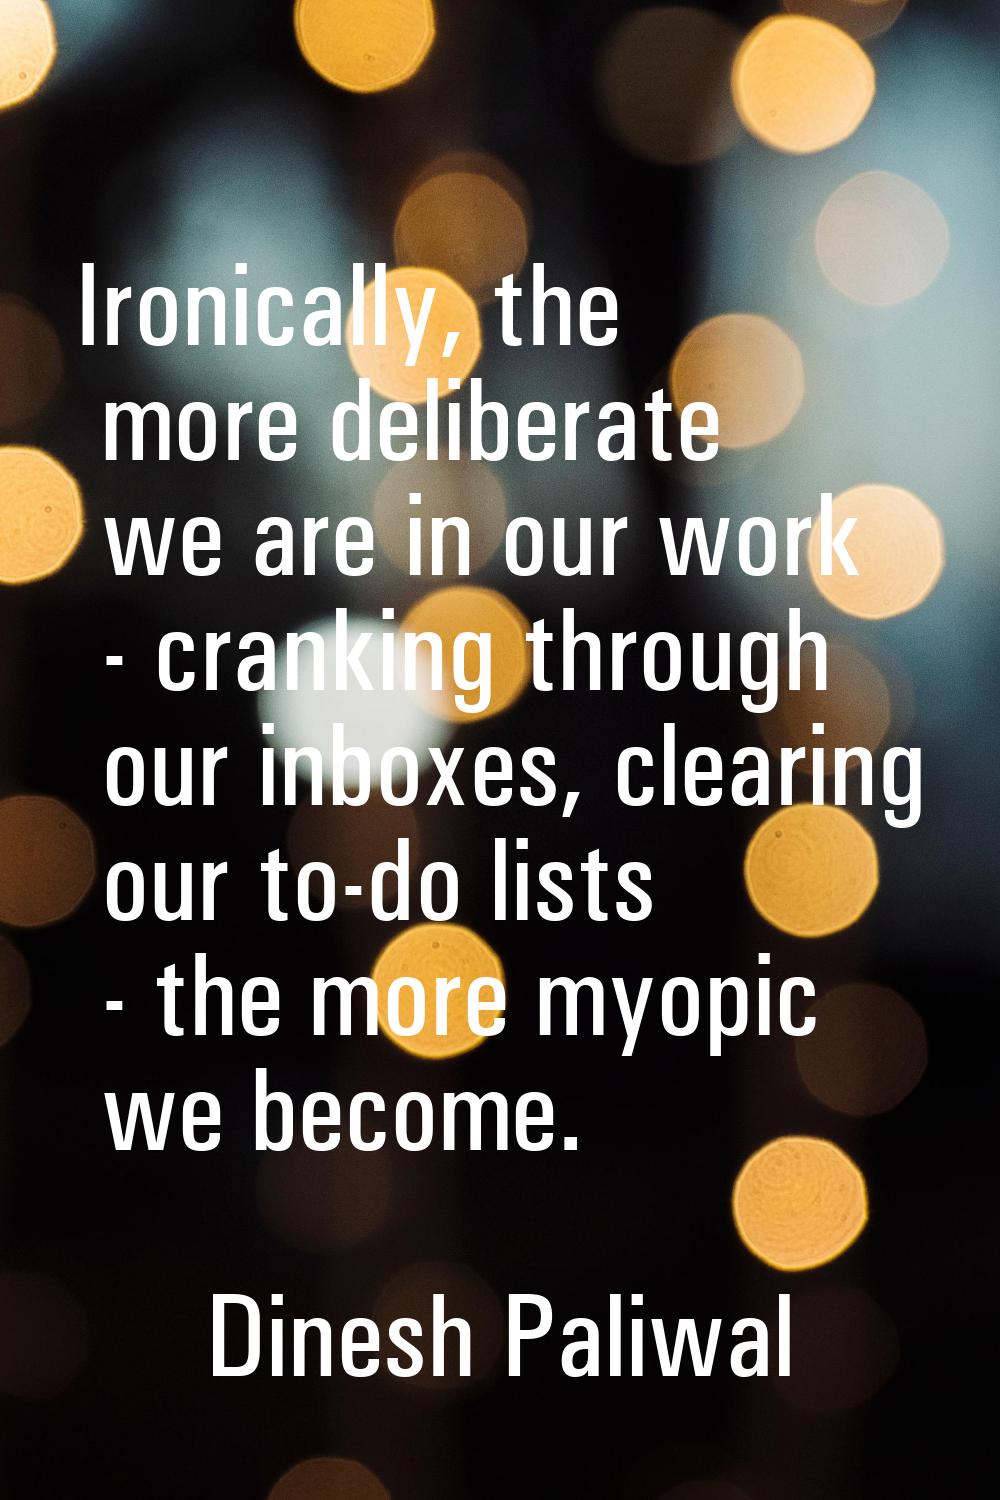 Ironically, the more deliberate we are in our work - cranking through our inboxes, clearing our to-